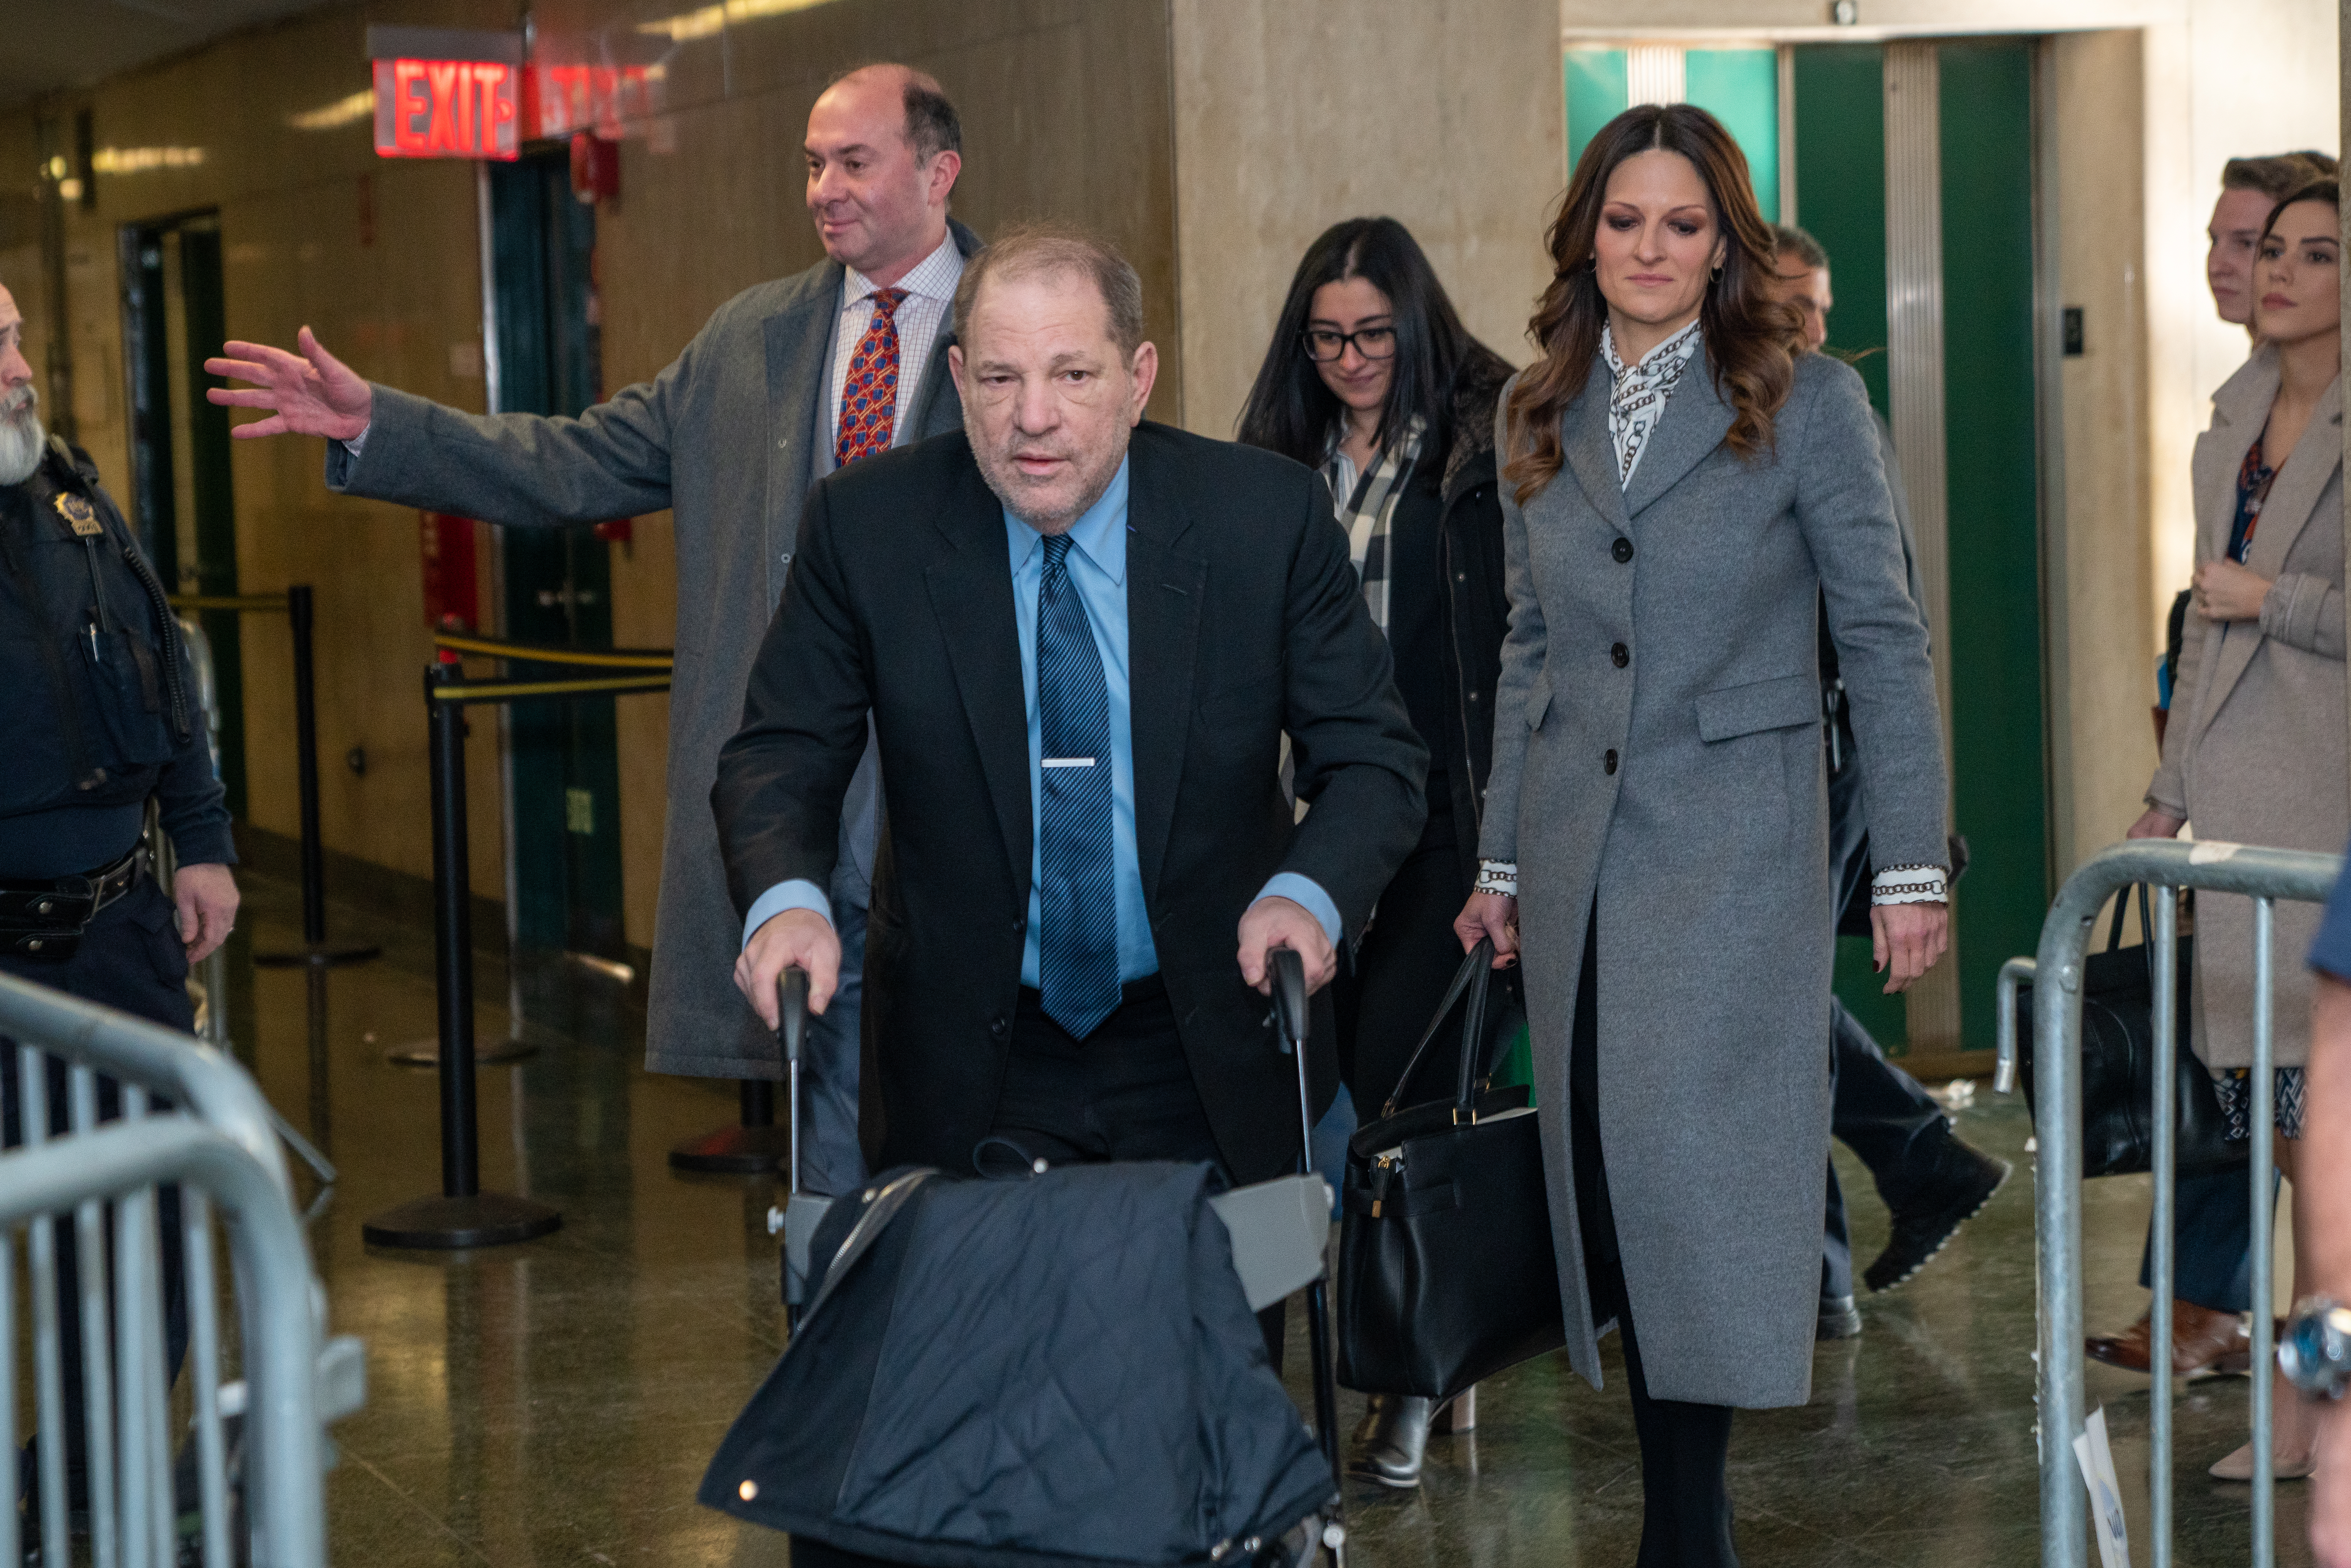 Harvey Weinstein arrives at Manhattan Criminal Court for his sexual assault trial on January 29, 2020 in New York City. Weinstein, whose alleged sexual misconduct helped spark the #MeToo movement, pleaded not-guilty on five counts of rape and sexual assault against two unnamed women and faces a possible life sentence in prison. (Photo by David Dee Delgado/Getty Images)